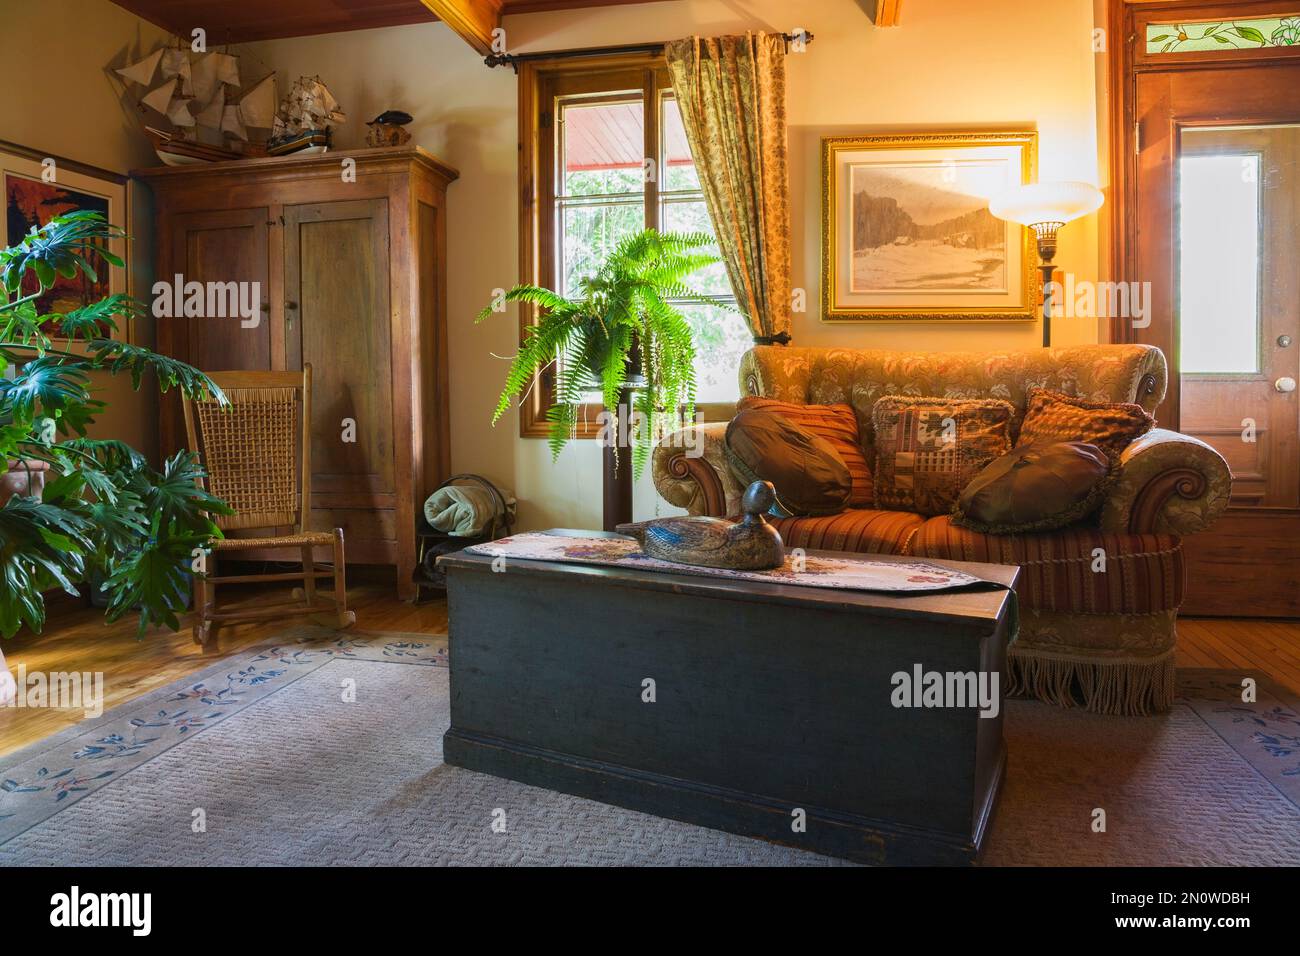 Family room with antique wooden storage chest coffee table, upholstered sofa, woven seat rocking chair and pinewood armoire inside old circa 1850 home. Stock Photo